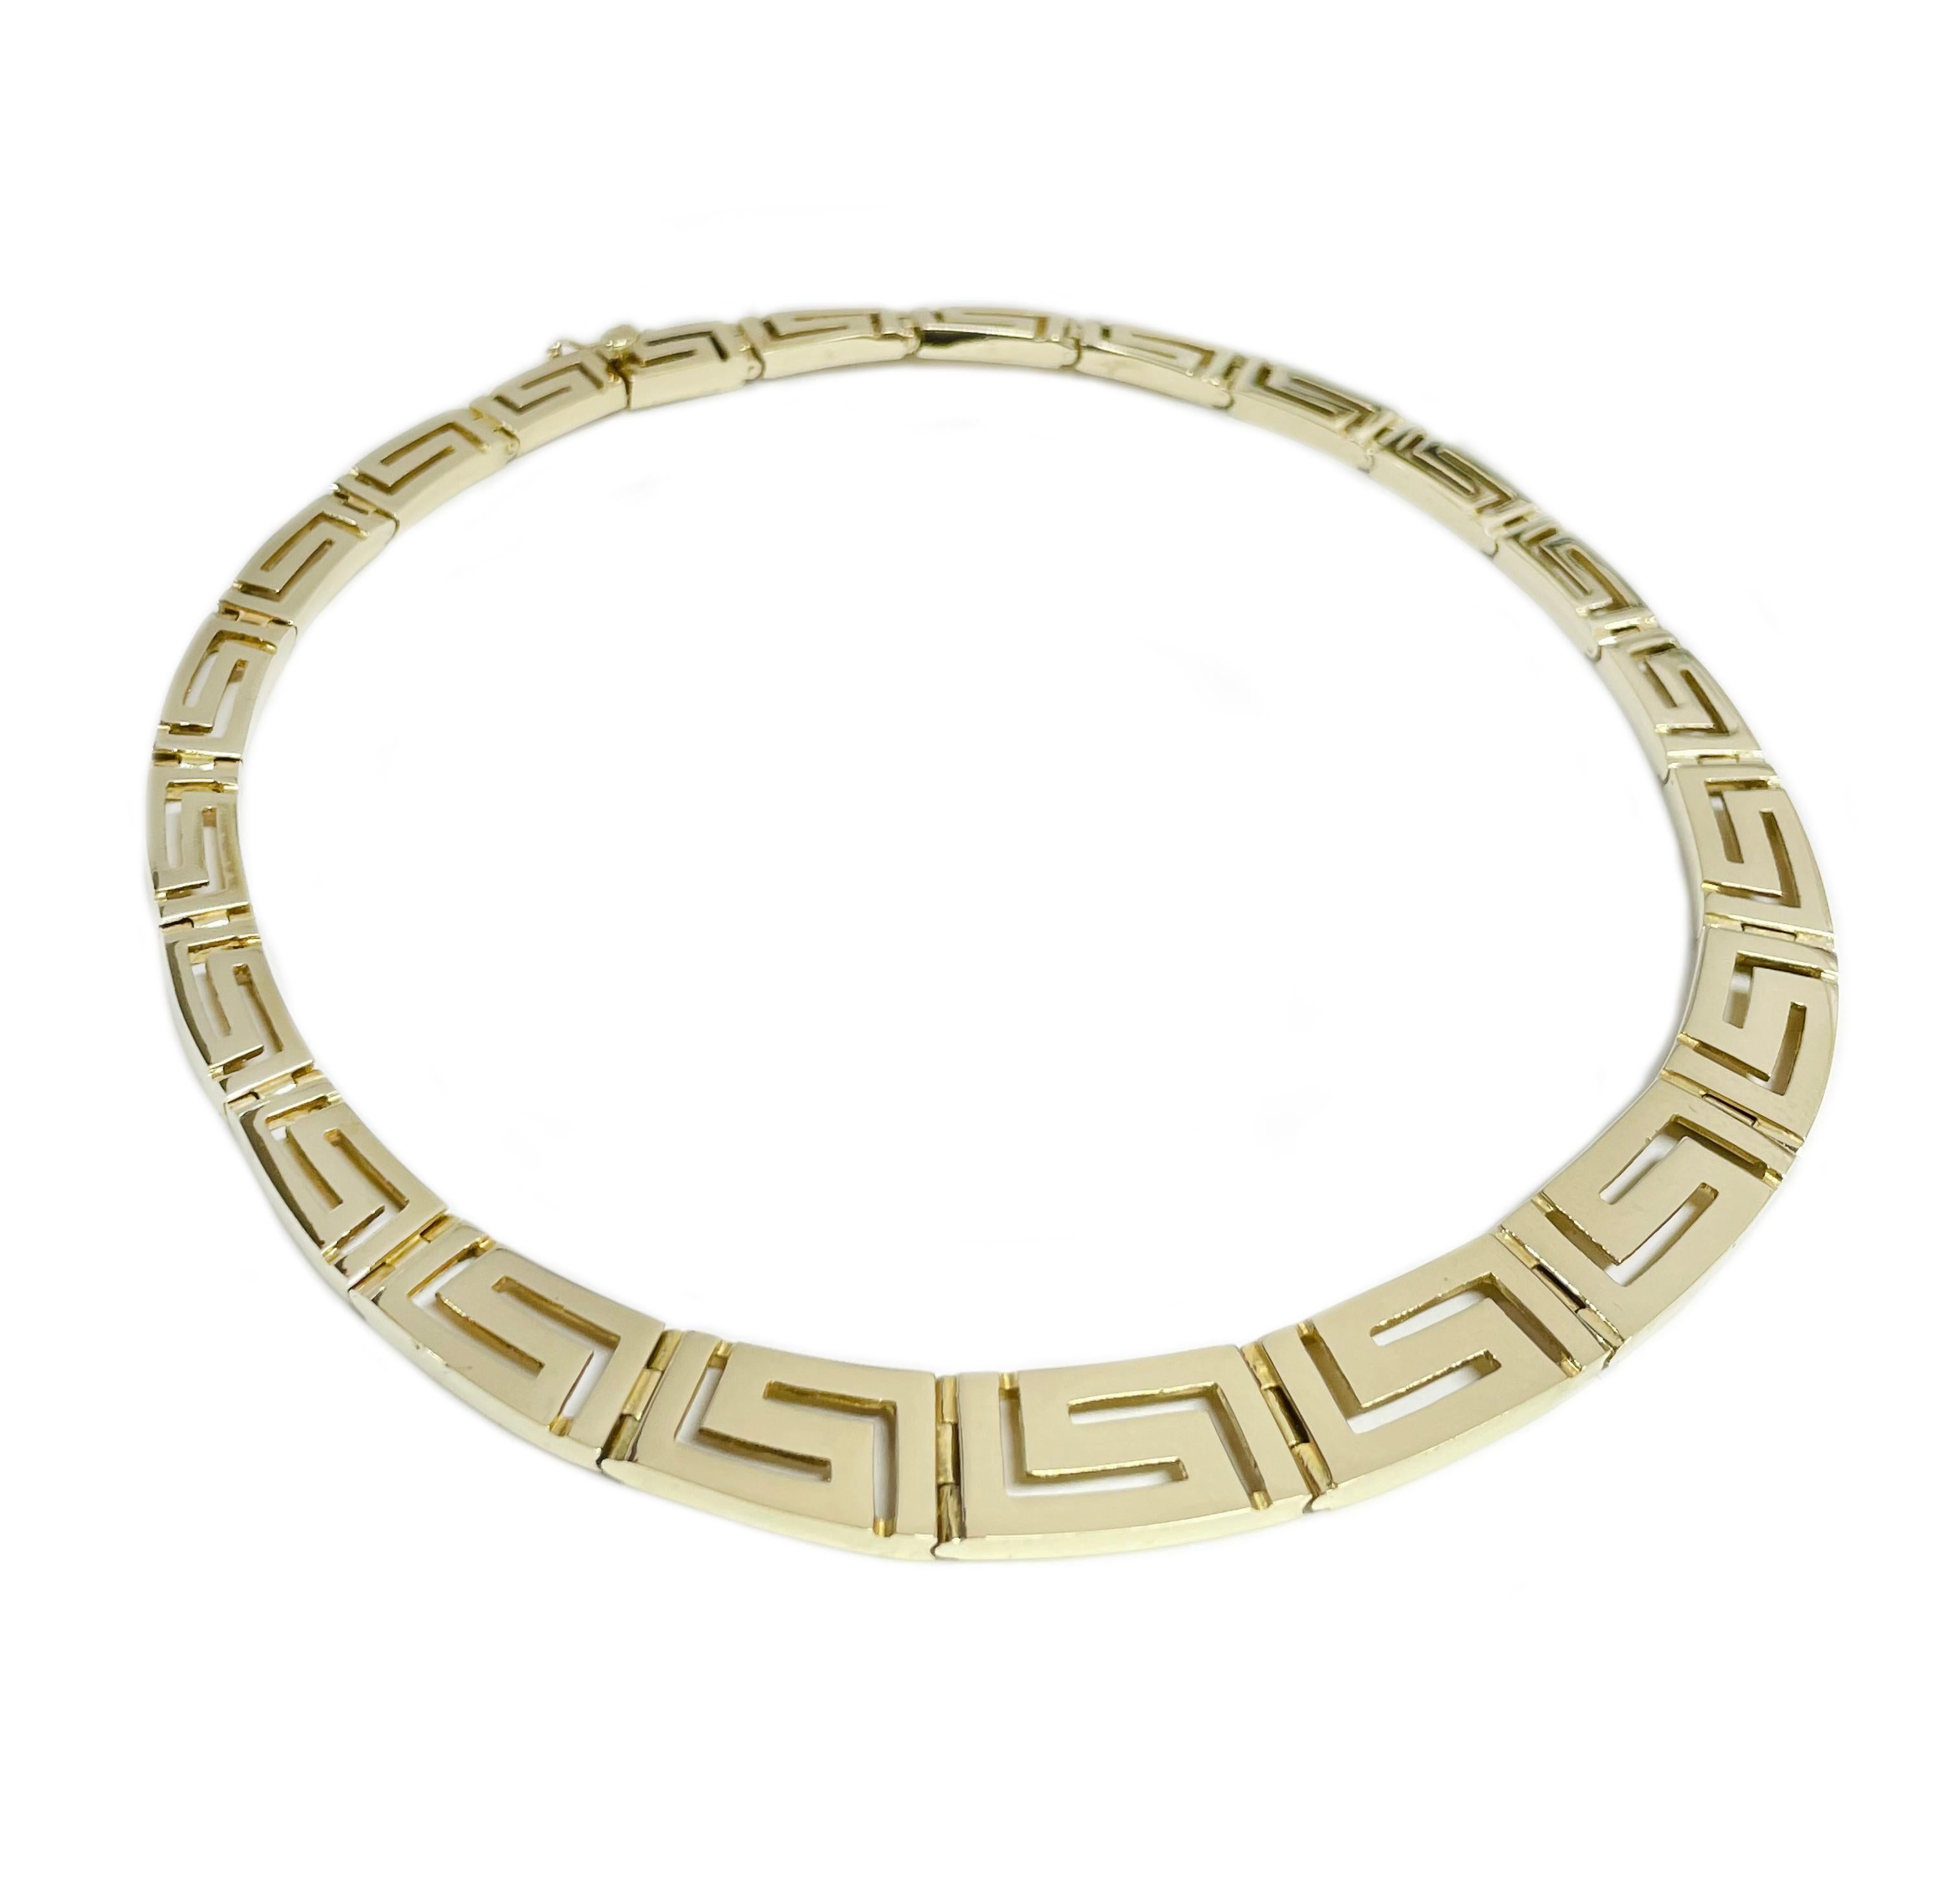 14 Karat Gold Greek Key Eternity Choker Necklace. The necklace consists of graduate rectangular gold Greek key links. The links range from 12mm x 20mm to 7mm x 14mm. The necklace has a box clasp closure with a safety eight. Stamped on the back of